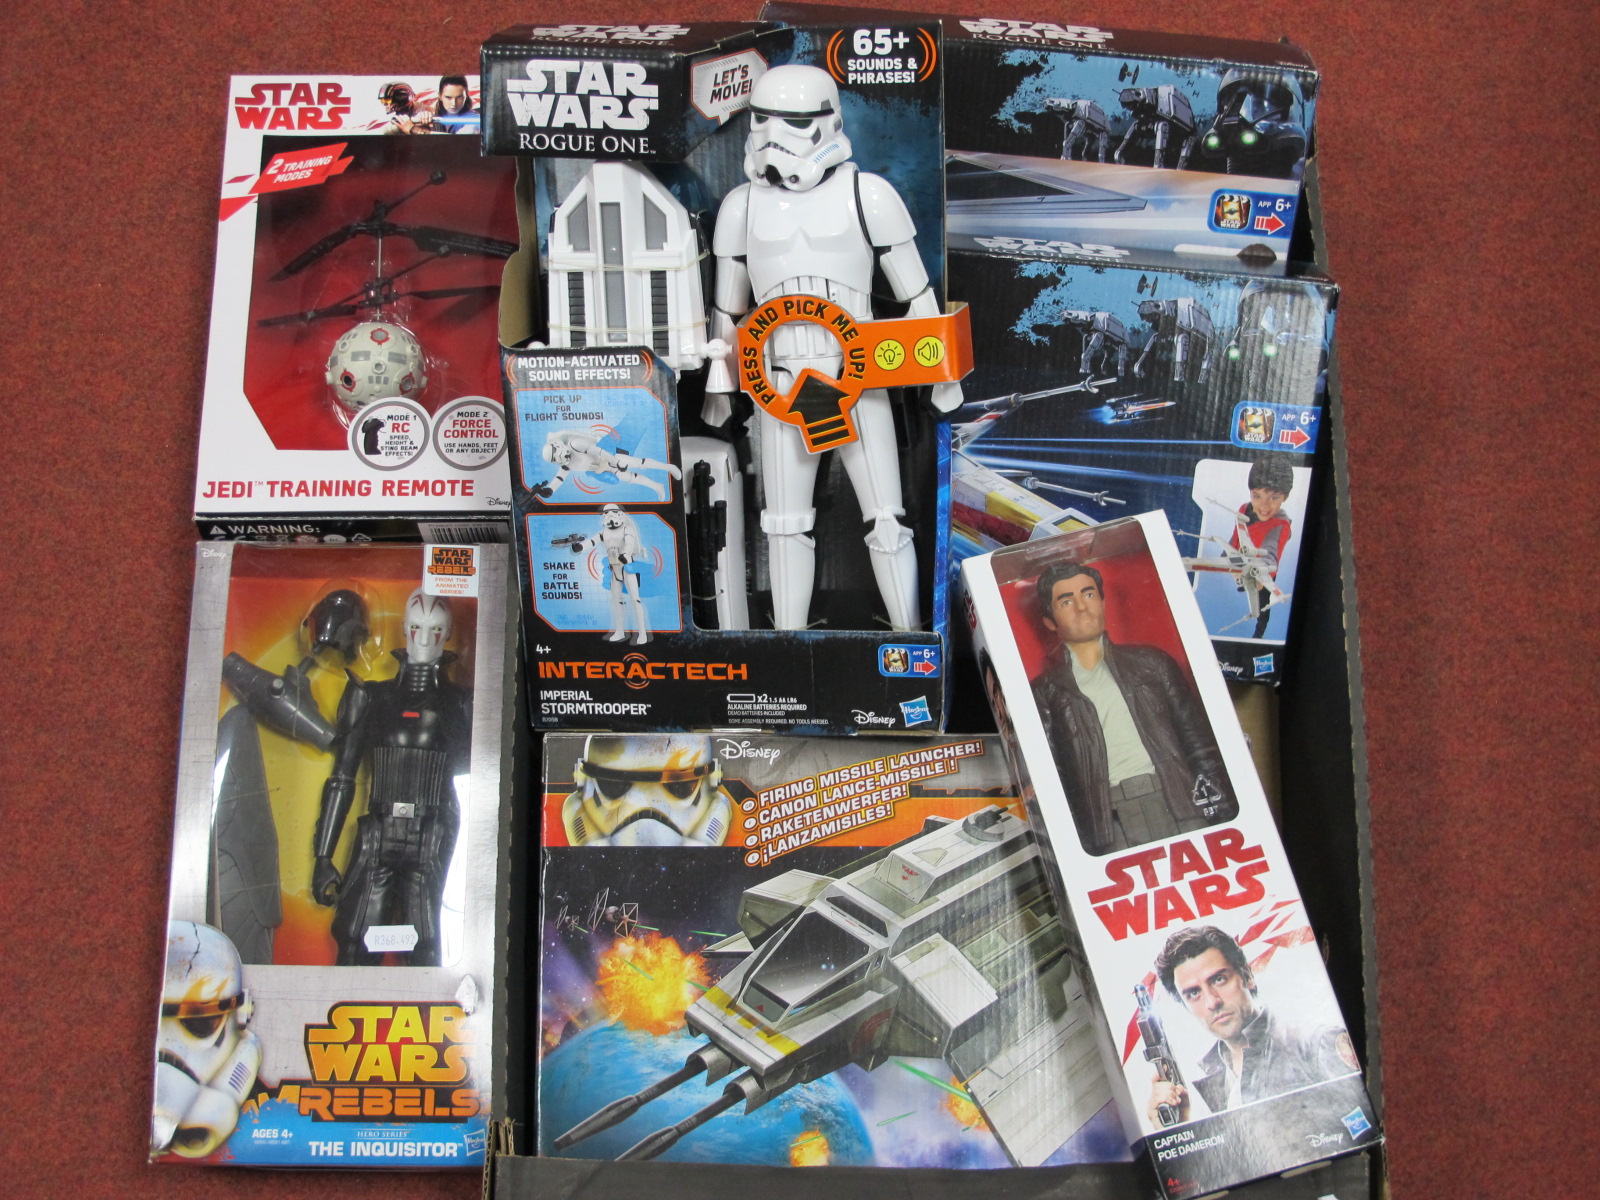 A Quantity of Modern Star Wars Plastic Model Action figures and Space Vehicles, predominantly by